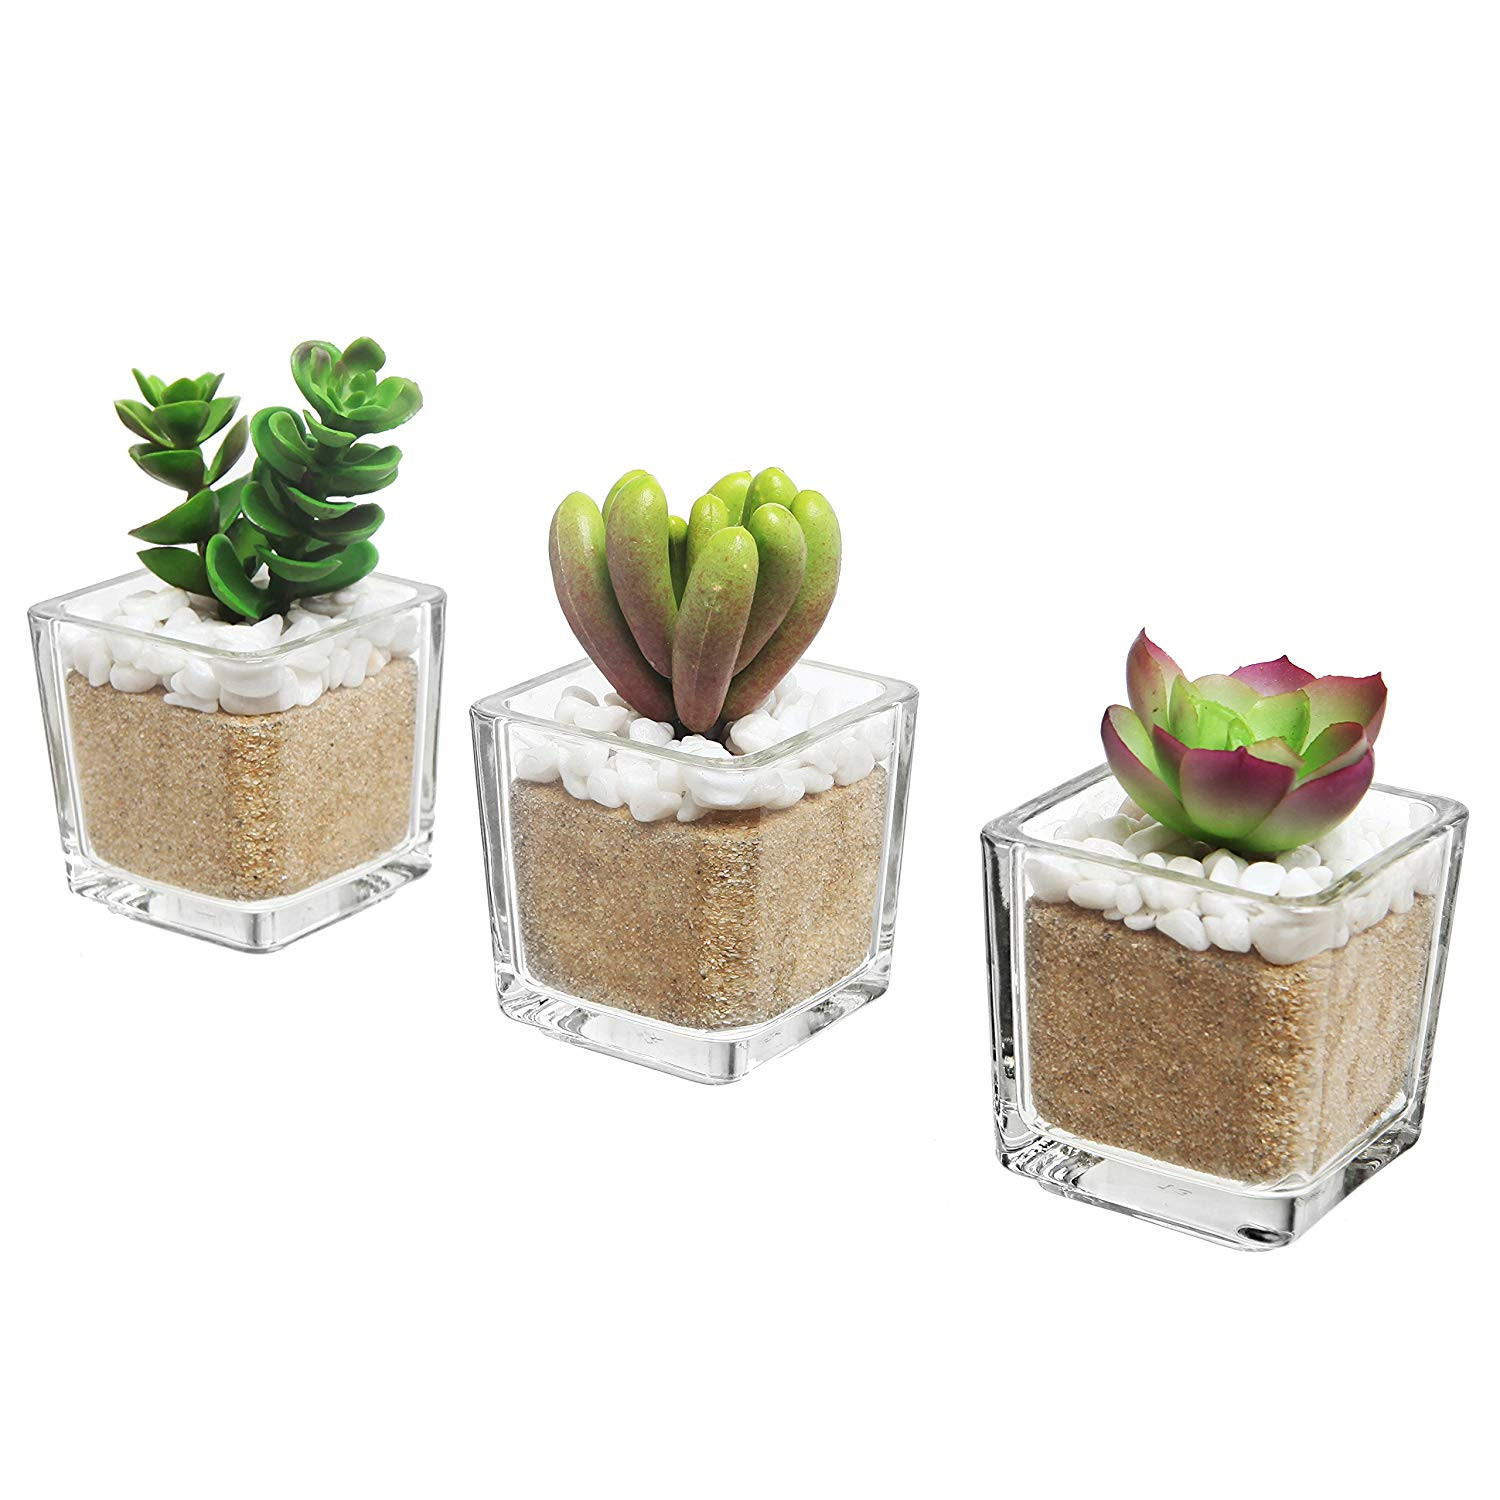 18 Recommended Glass Vases Depot Coupon 2024 free download glass vases depot coupon of amazon com set of 3 modern home decor mini artificial succulent in amazon com set of 3 modern home decor mini artificial succulent plants potted in glass cube sha